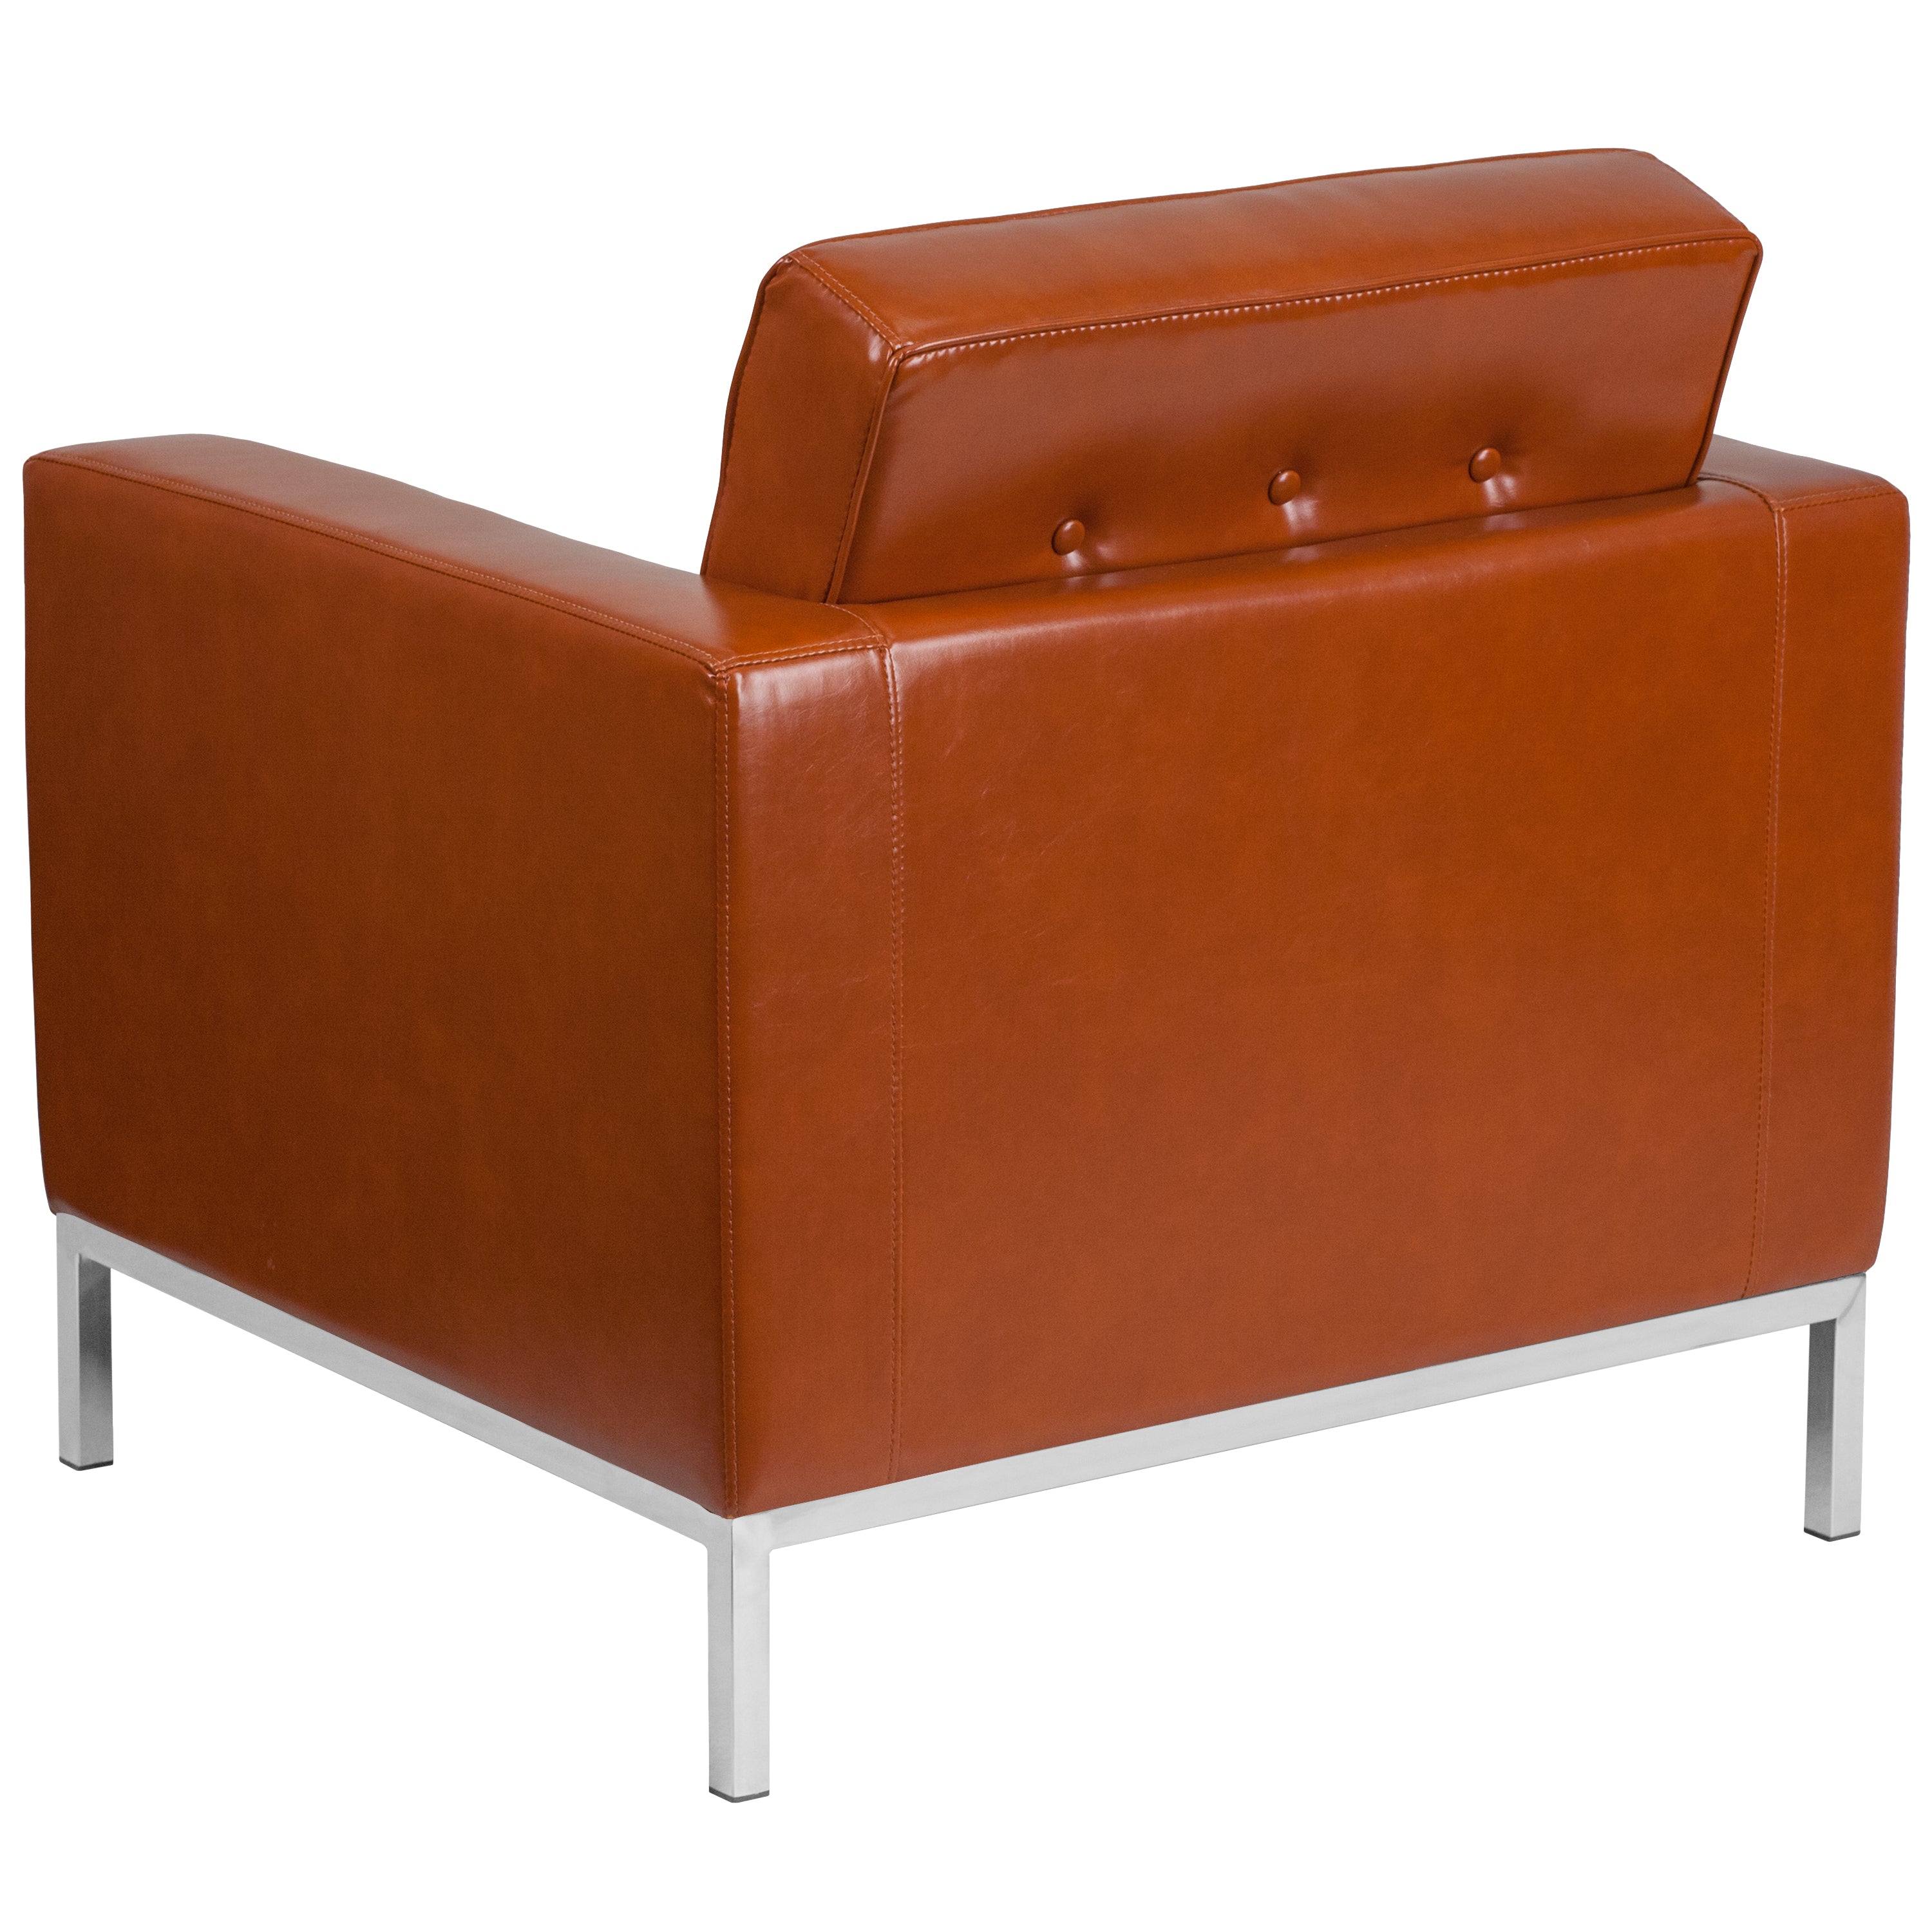 HERCULES Lacey Series Contemporary LeatherSoft Chair with Integrated Stainless Steel Frame-Reception Chair-Flash Furniture-Wall2Wall Furnishings